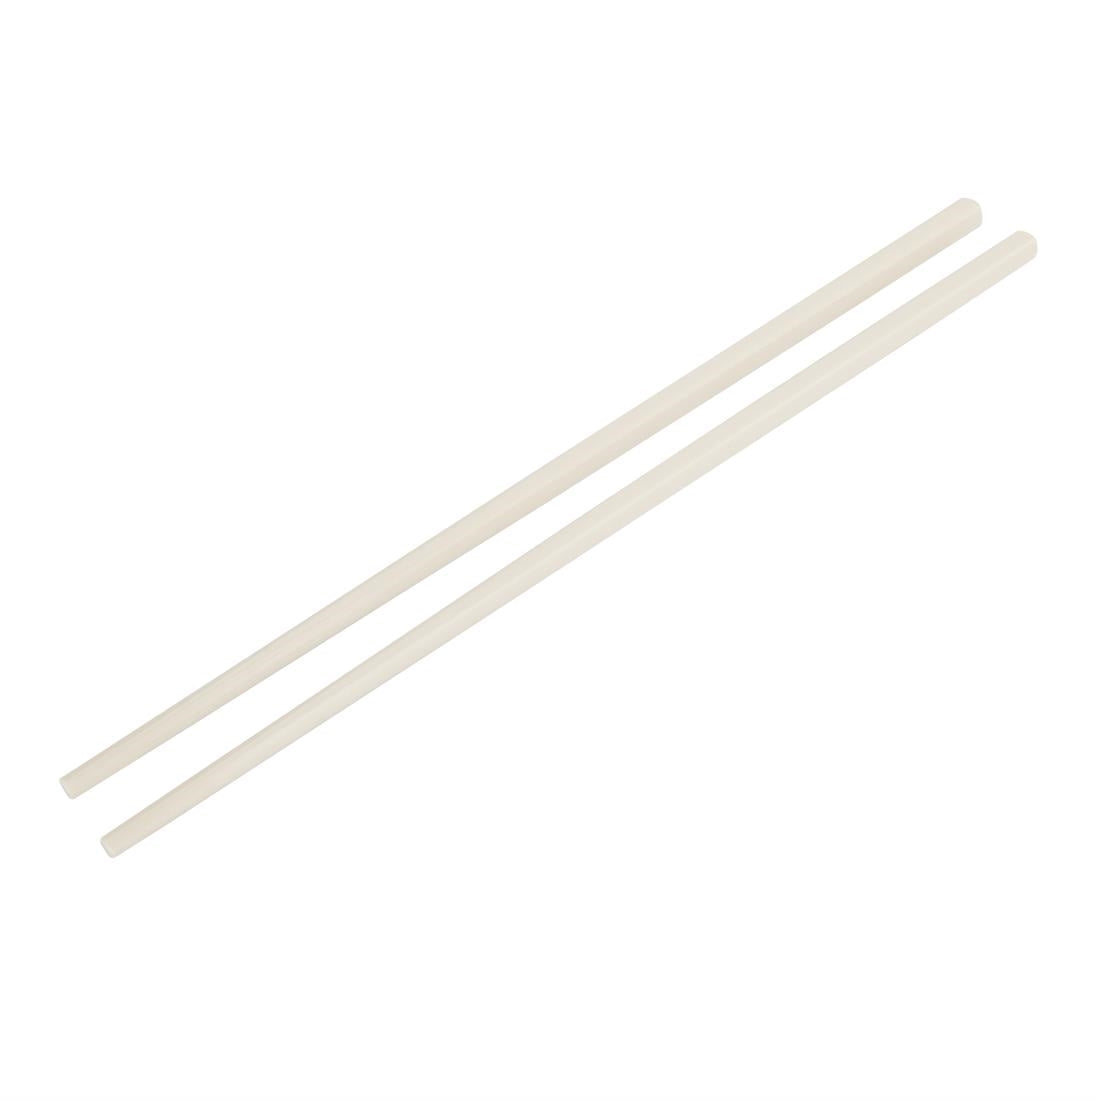 C966 Olympia Chopsticks (Pack of 10) JD Catering Equipment Solutions Ltd